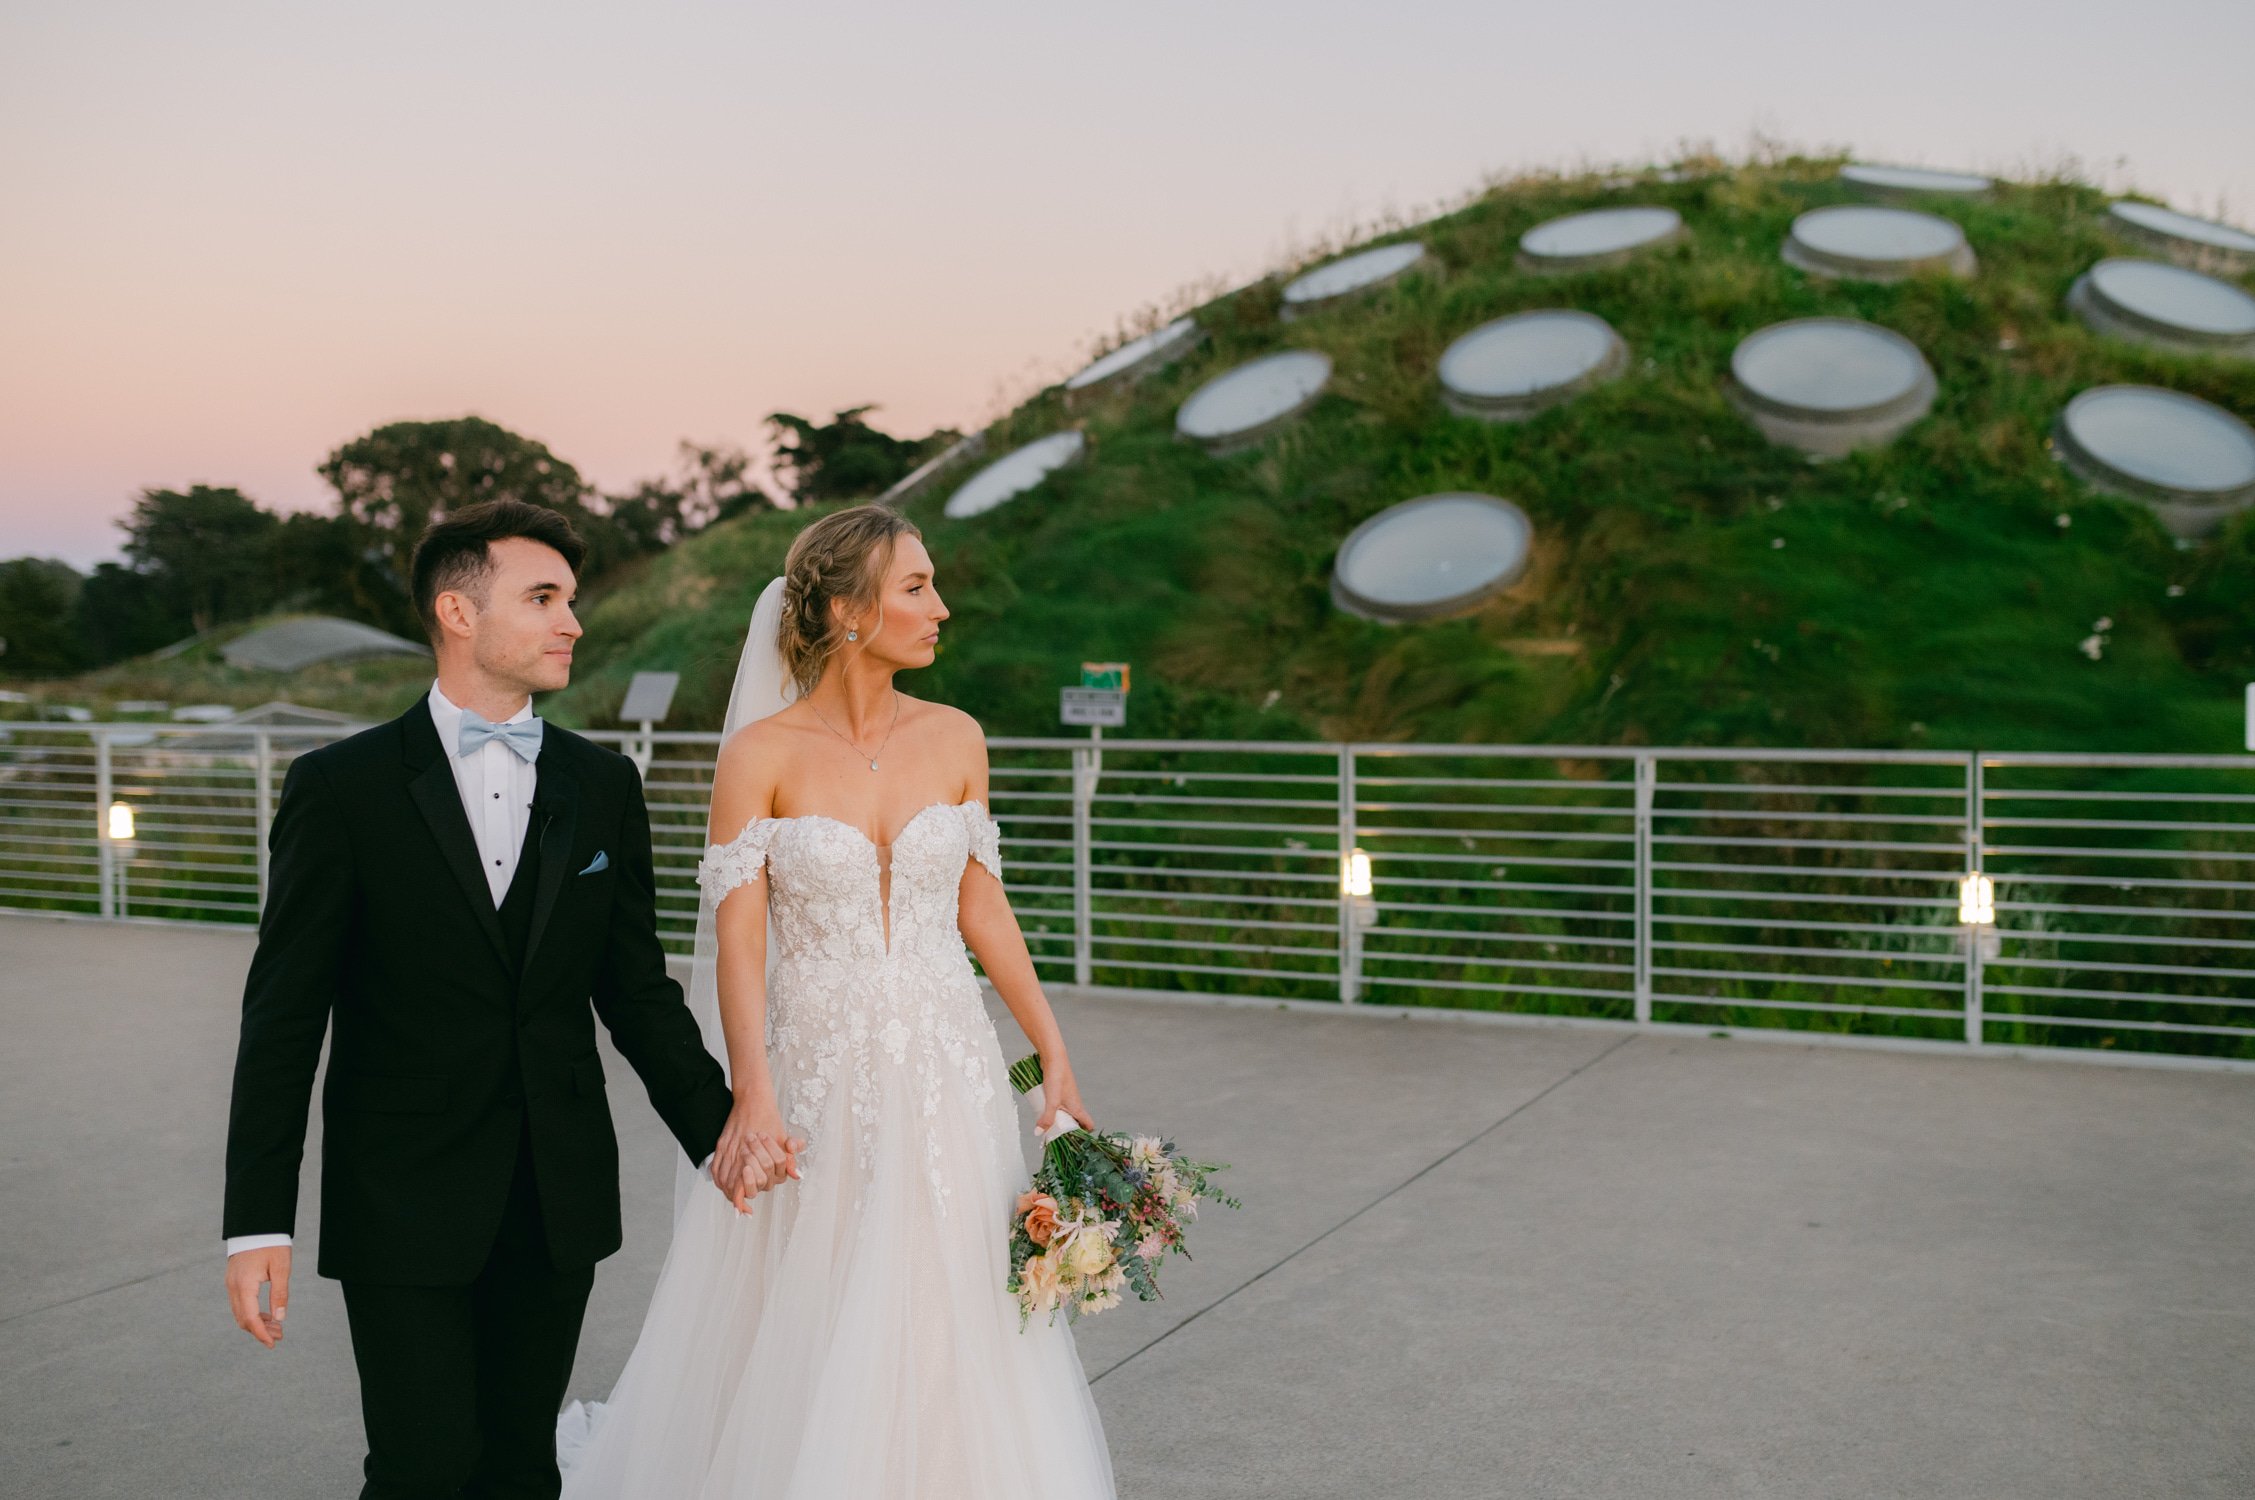 California academy of Sciences in San Francisco Wedding, photo of the couple walking outside holding hands